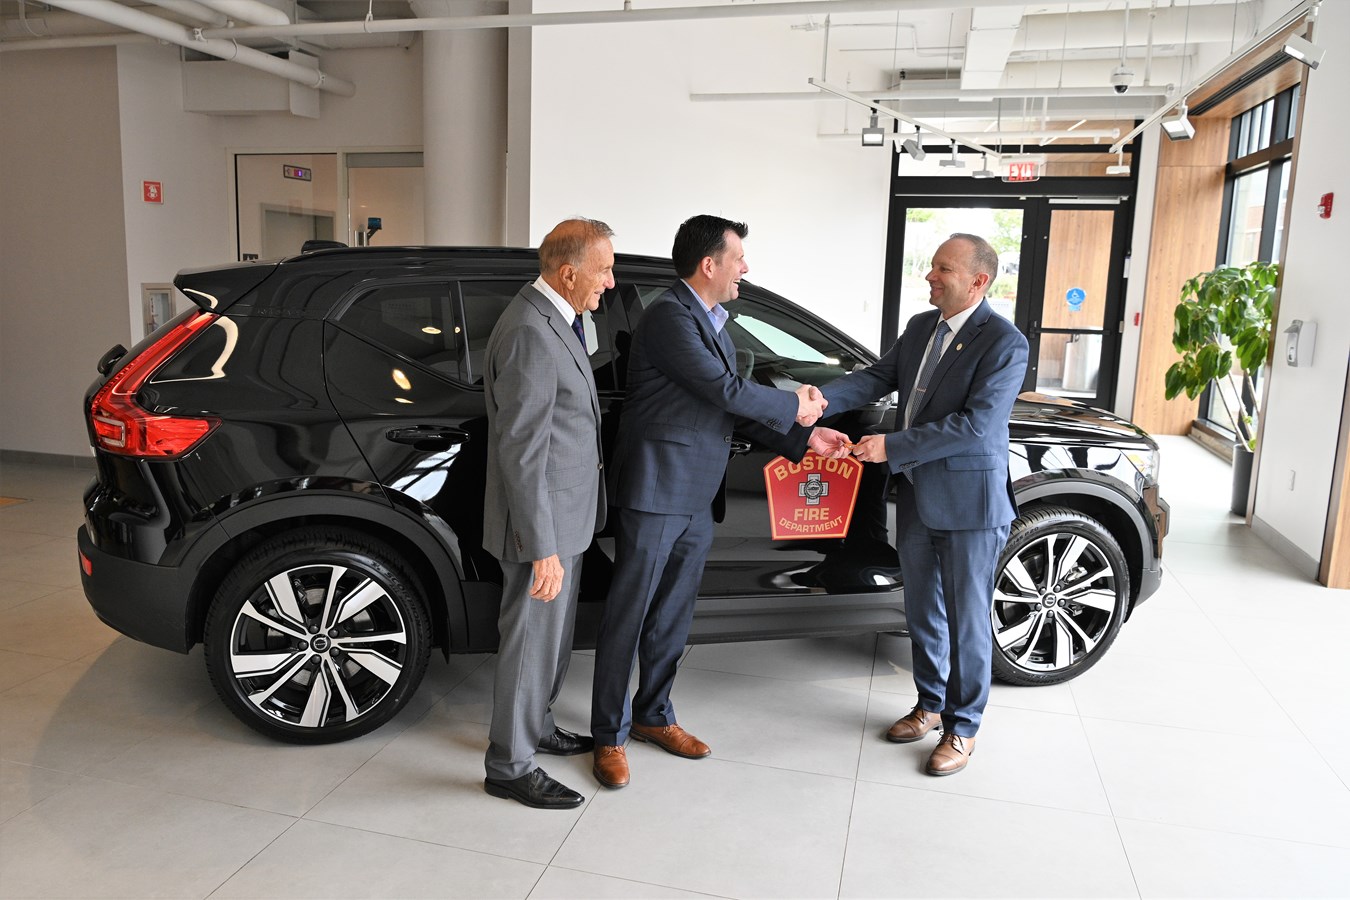 Eric Miller, Vice President Northeast Region, Volvo Car USA, center, hands keys to the Volvo XC40 Recharge electric SUV the company provided BFD for rescue training to Jack Dempsey, Boston Fire Department Fire Commissioner, while Ray Ciccolo, Founder, Village Automotive Group looks on at Boston Volvo Cars in Allston.